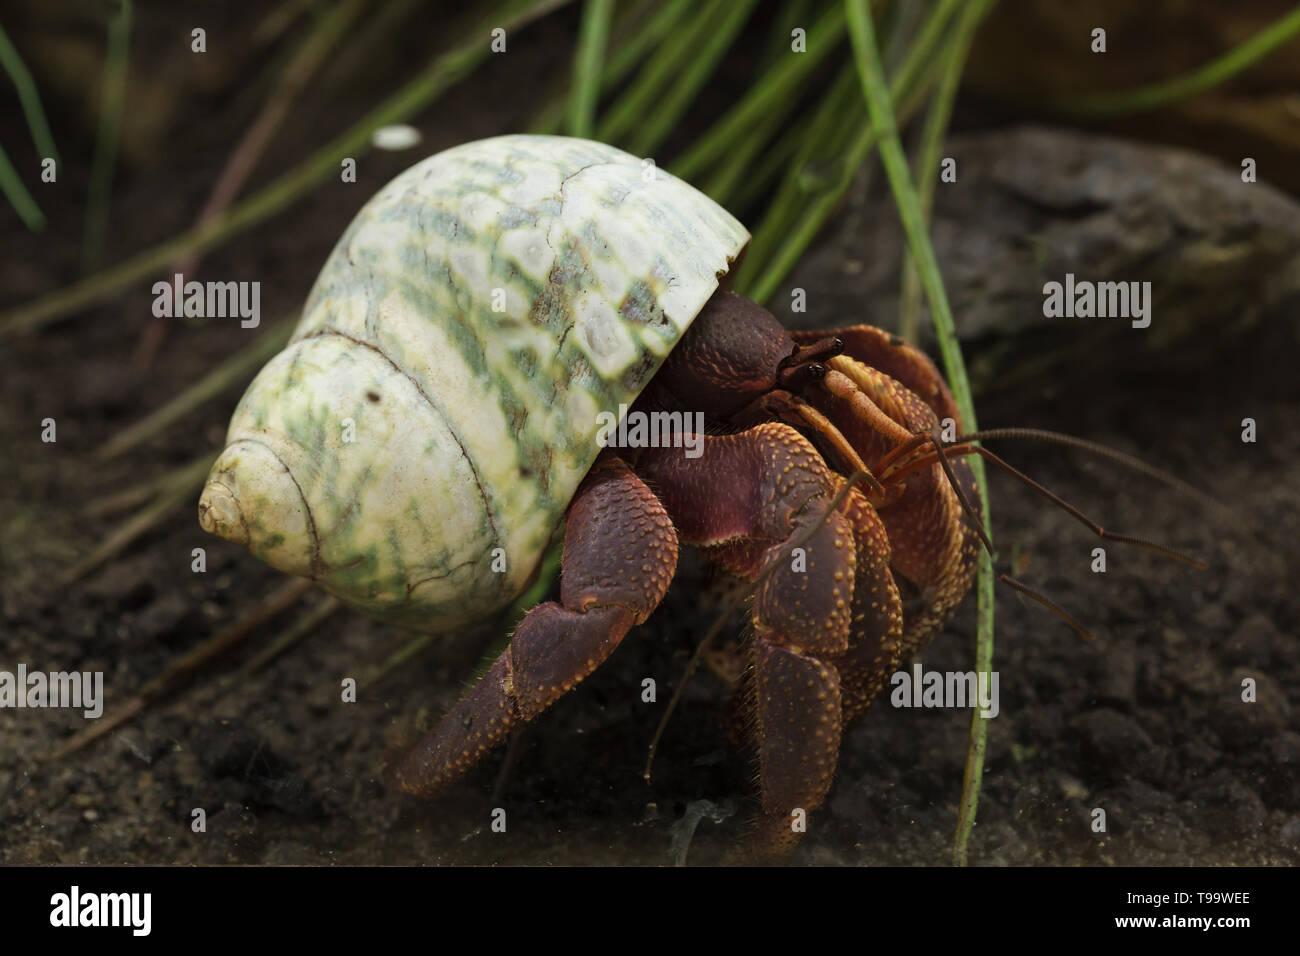 Caribbean hermit crab (Coenobita clypeatus), also known as the soldier crab. Stock Photo